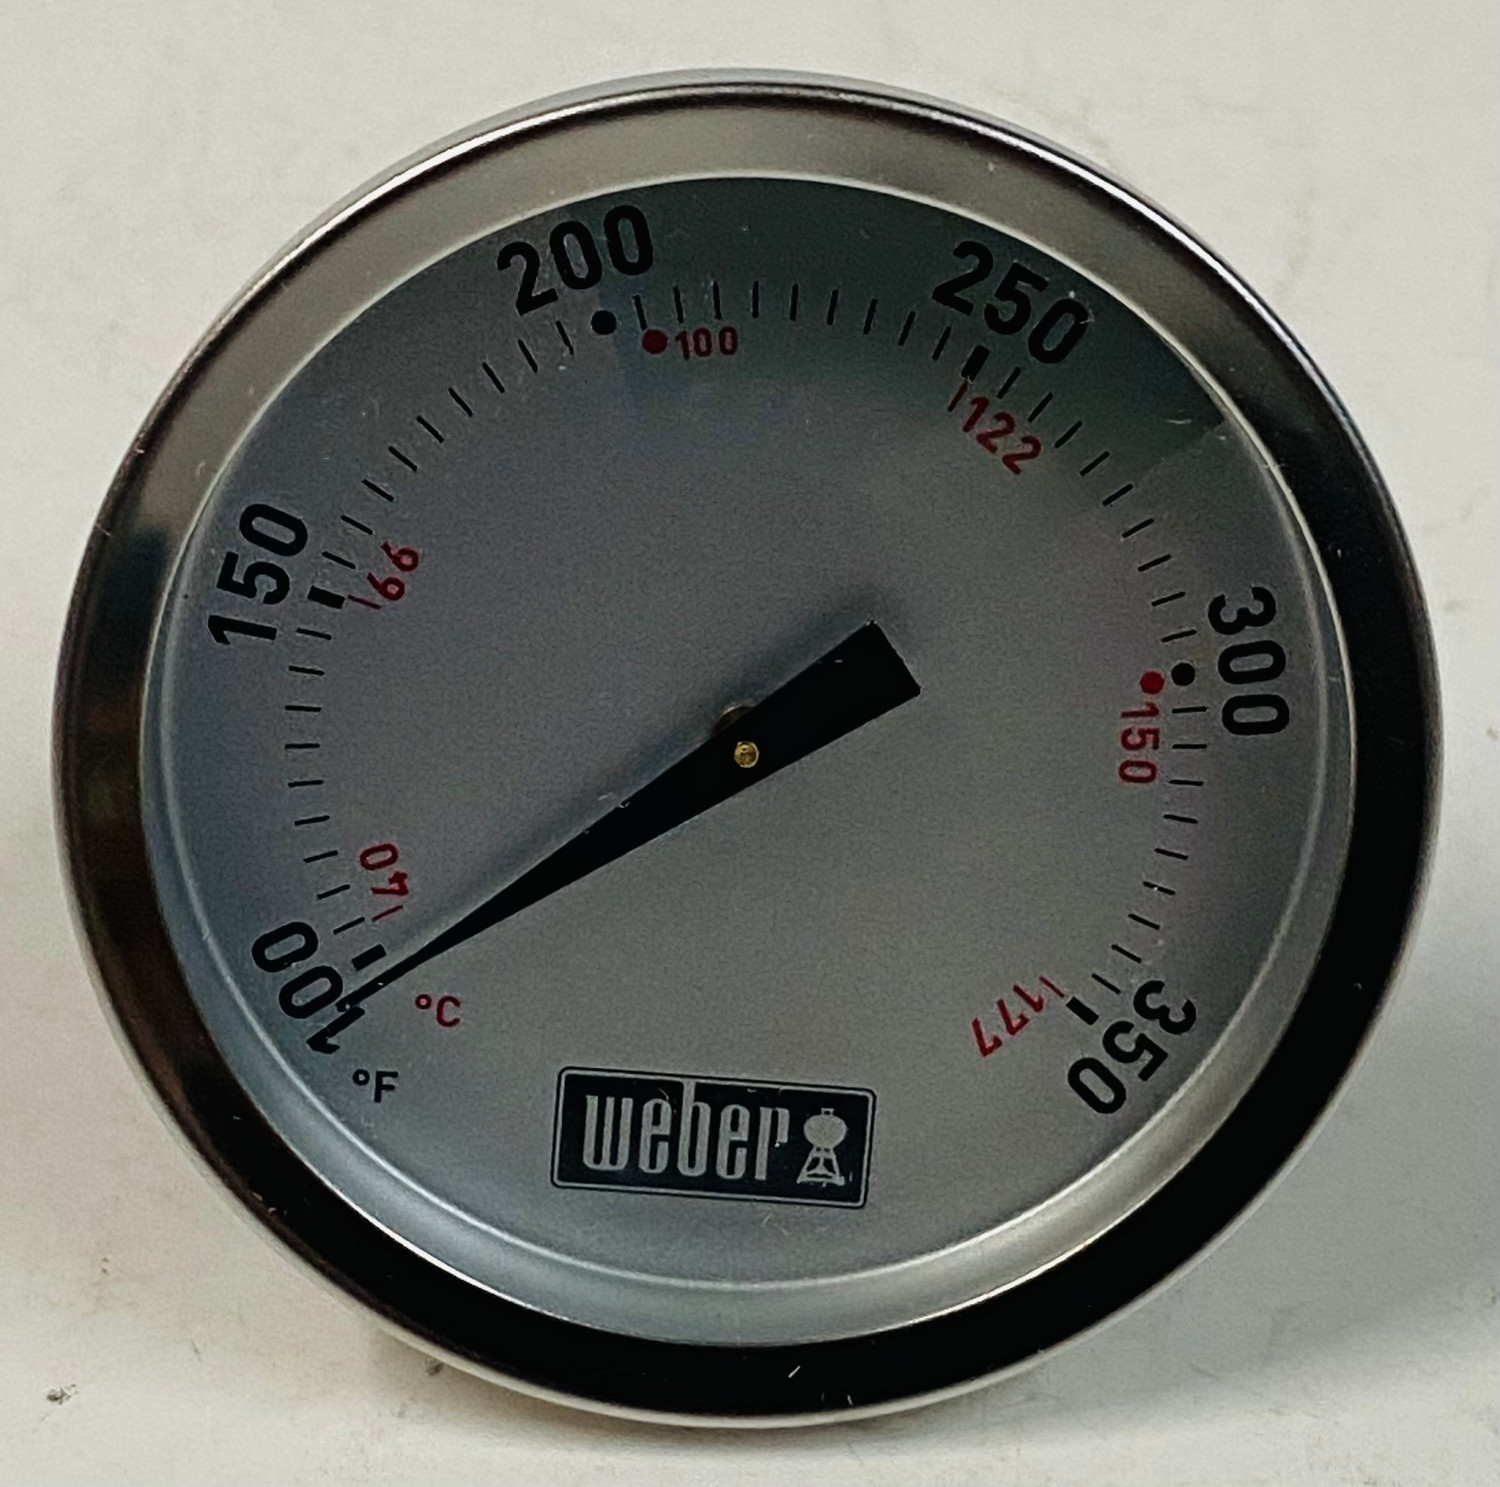 https://cdn2.bigcommerce.com/server1300/4k85vhi/products/22374/images/29887/Weber_22_inch_Smokey_Mountain_Cooker_Thermometer_-_63029__88080.1694115816.1500.1500.jpg?c=2